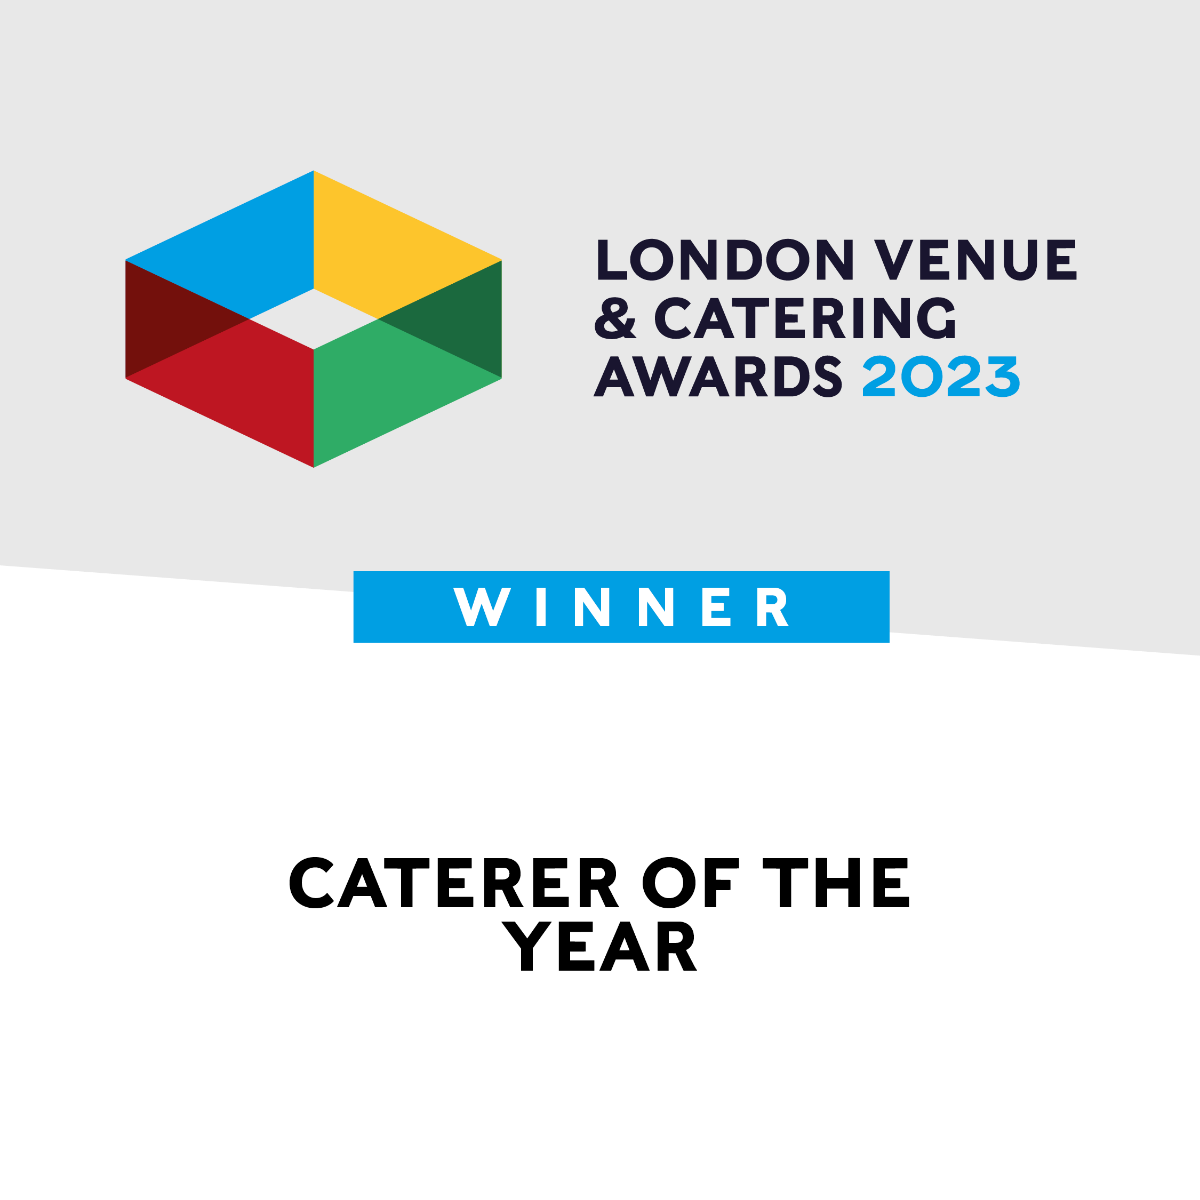 Winner of Caterer of the Year at the London Venue & Catering Awards 2023